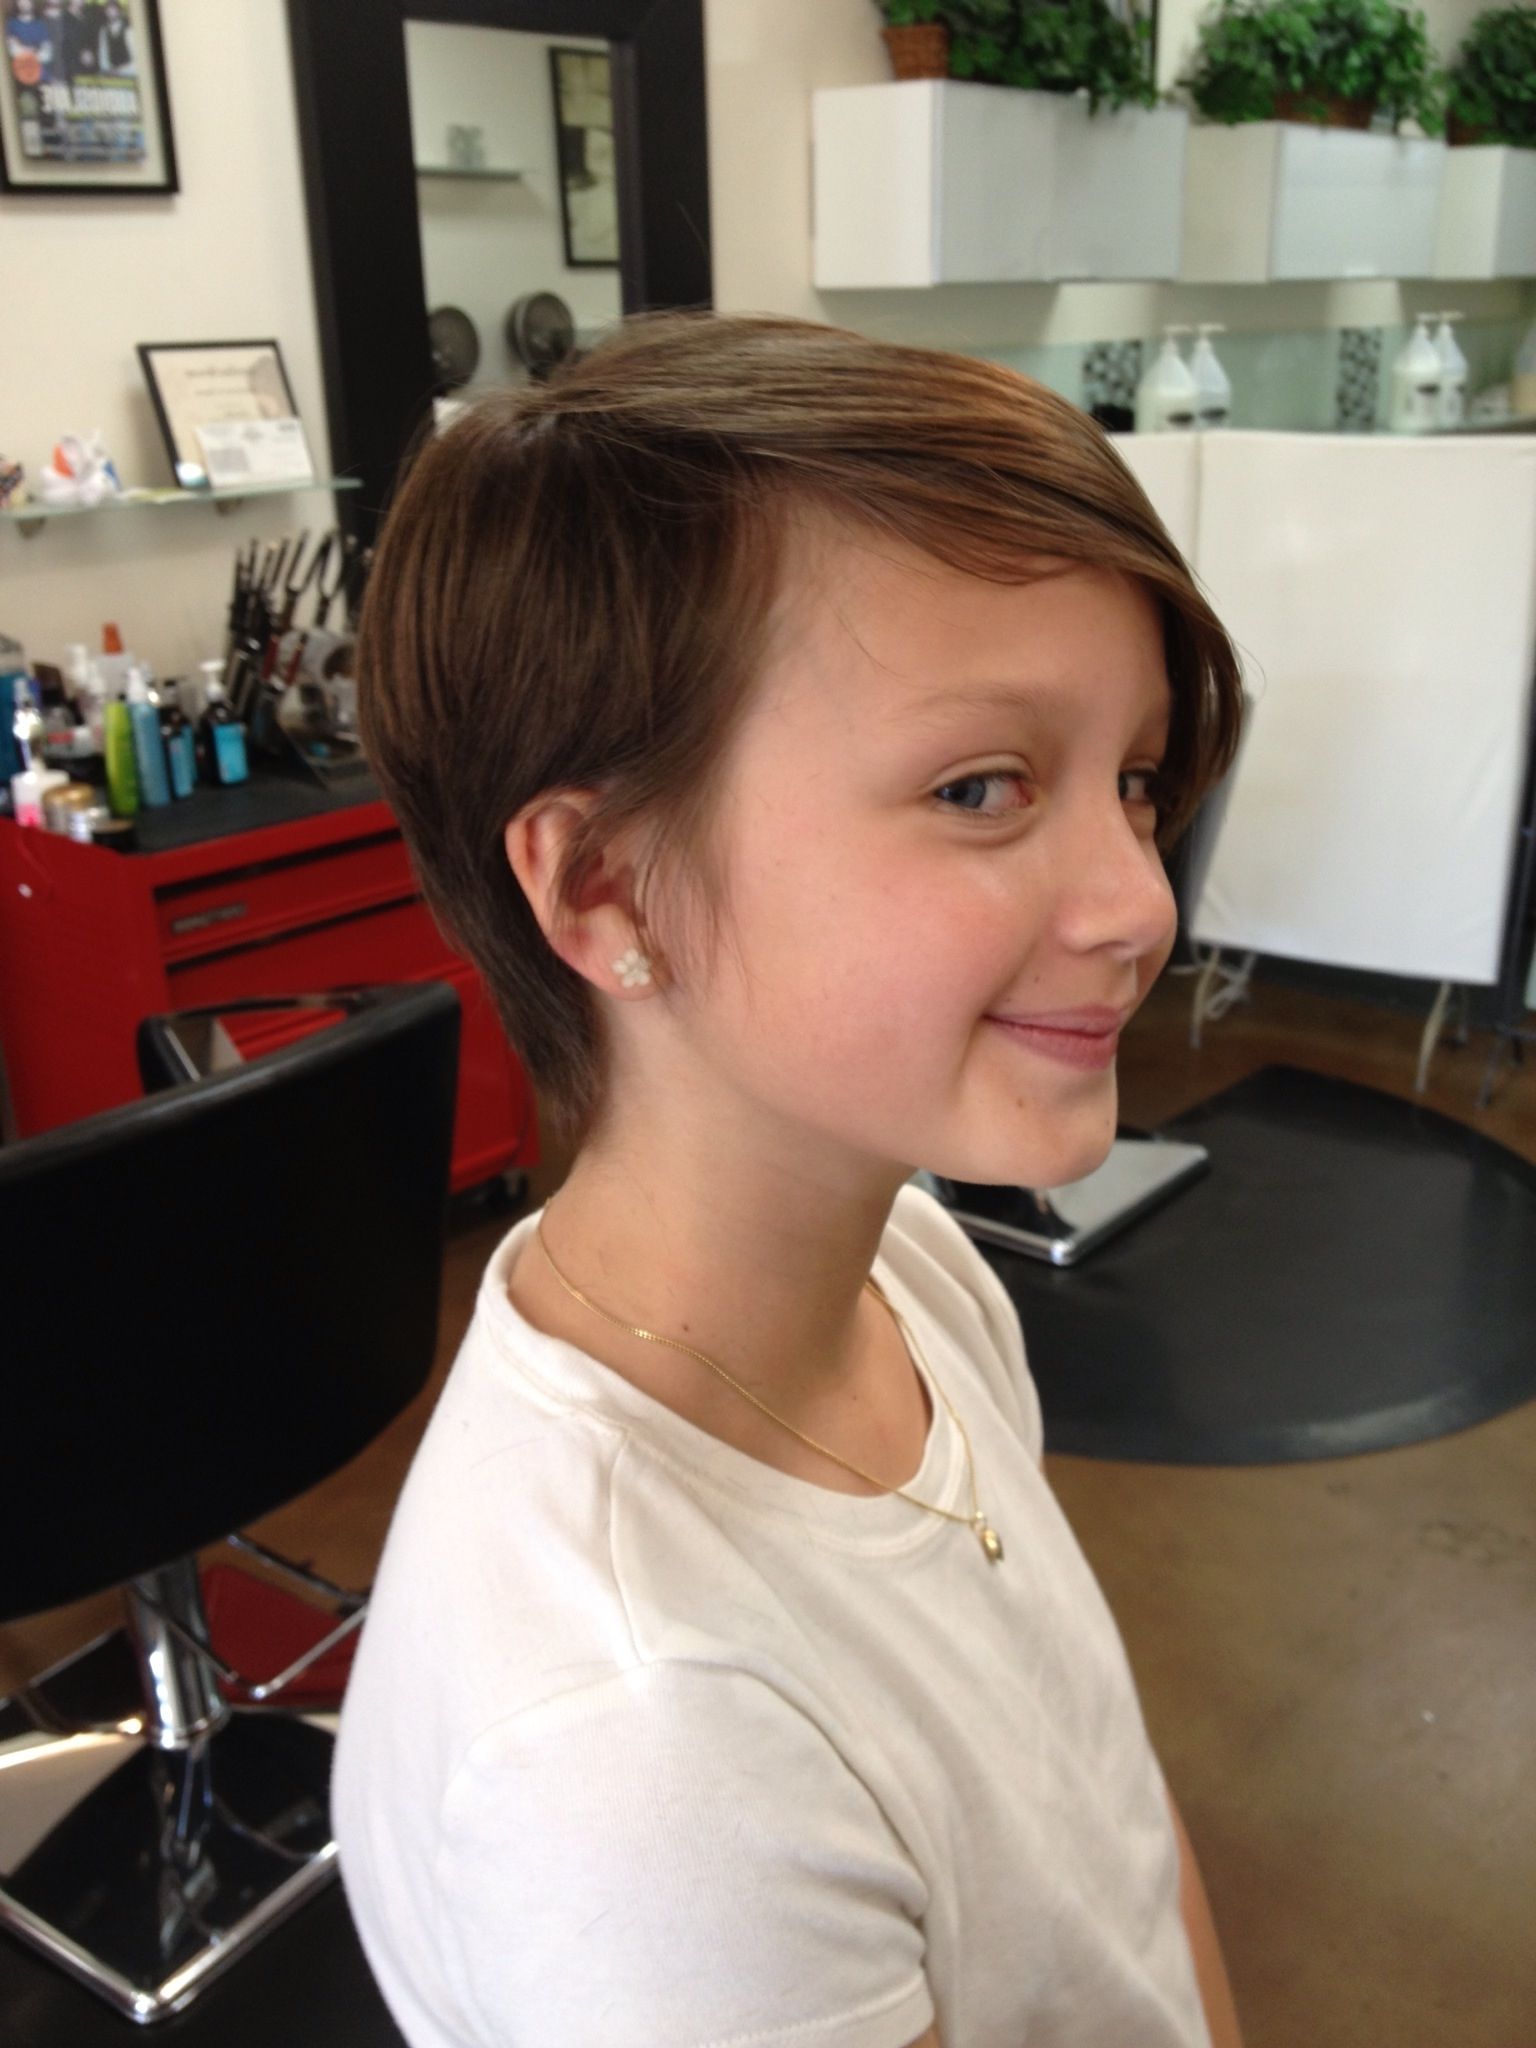 Cool Pixie Cut For A Tween (View 10 of 15)